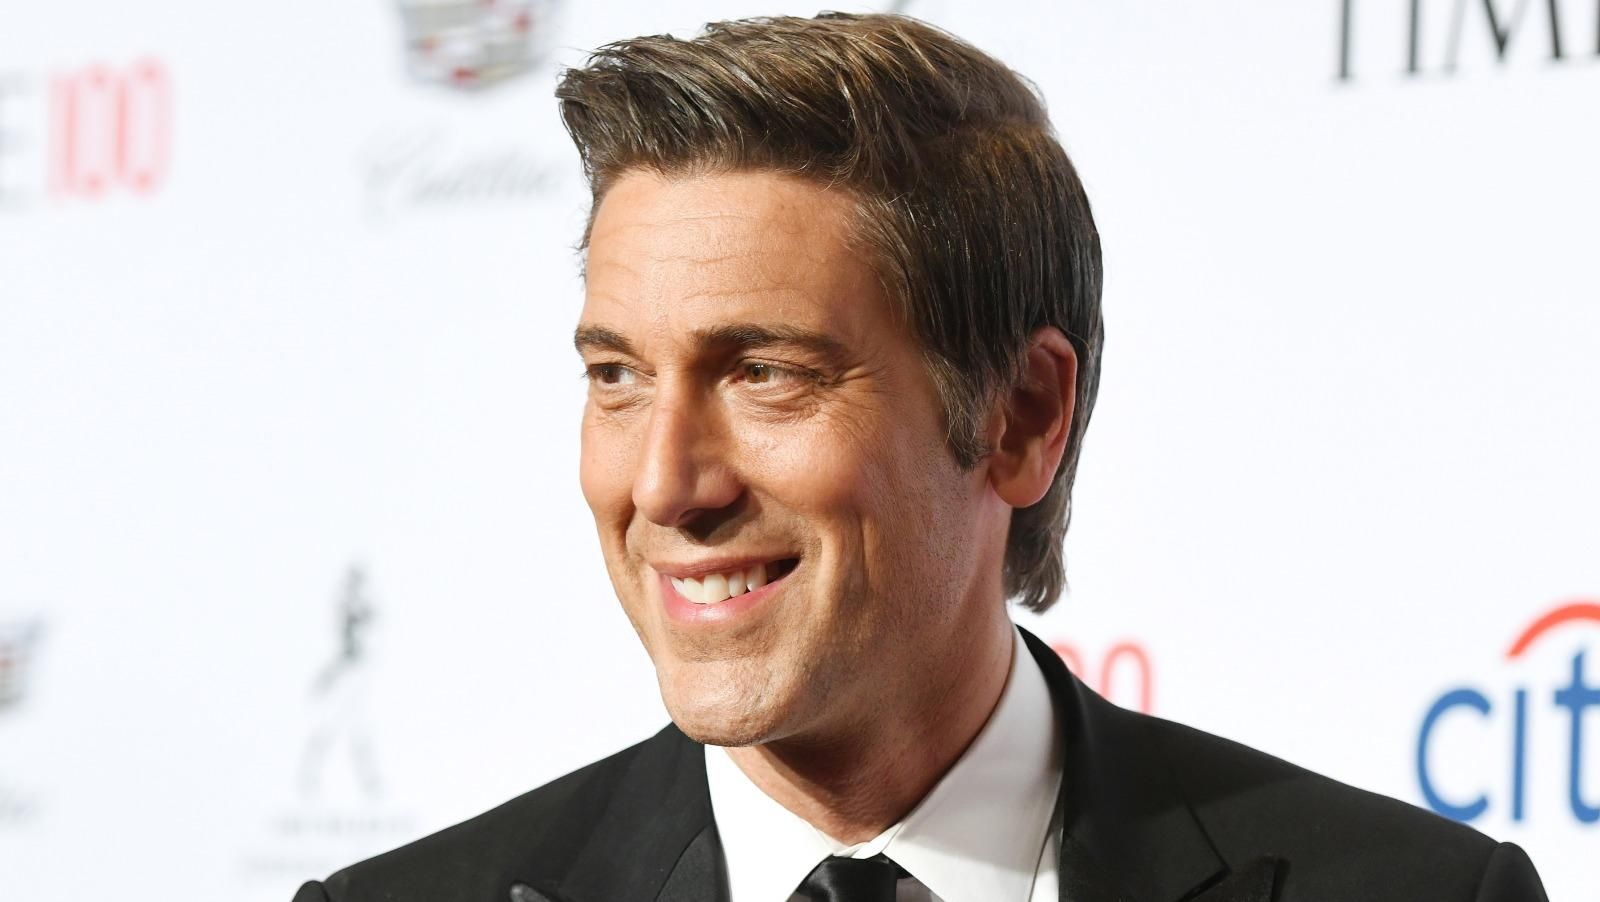 10 Things You Should Know About David Muir